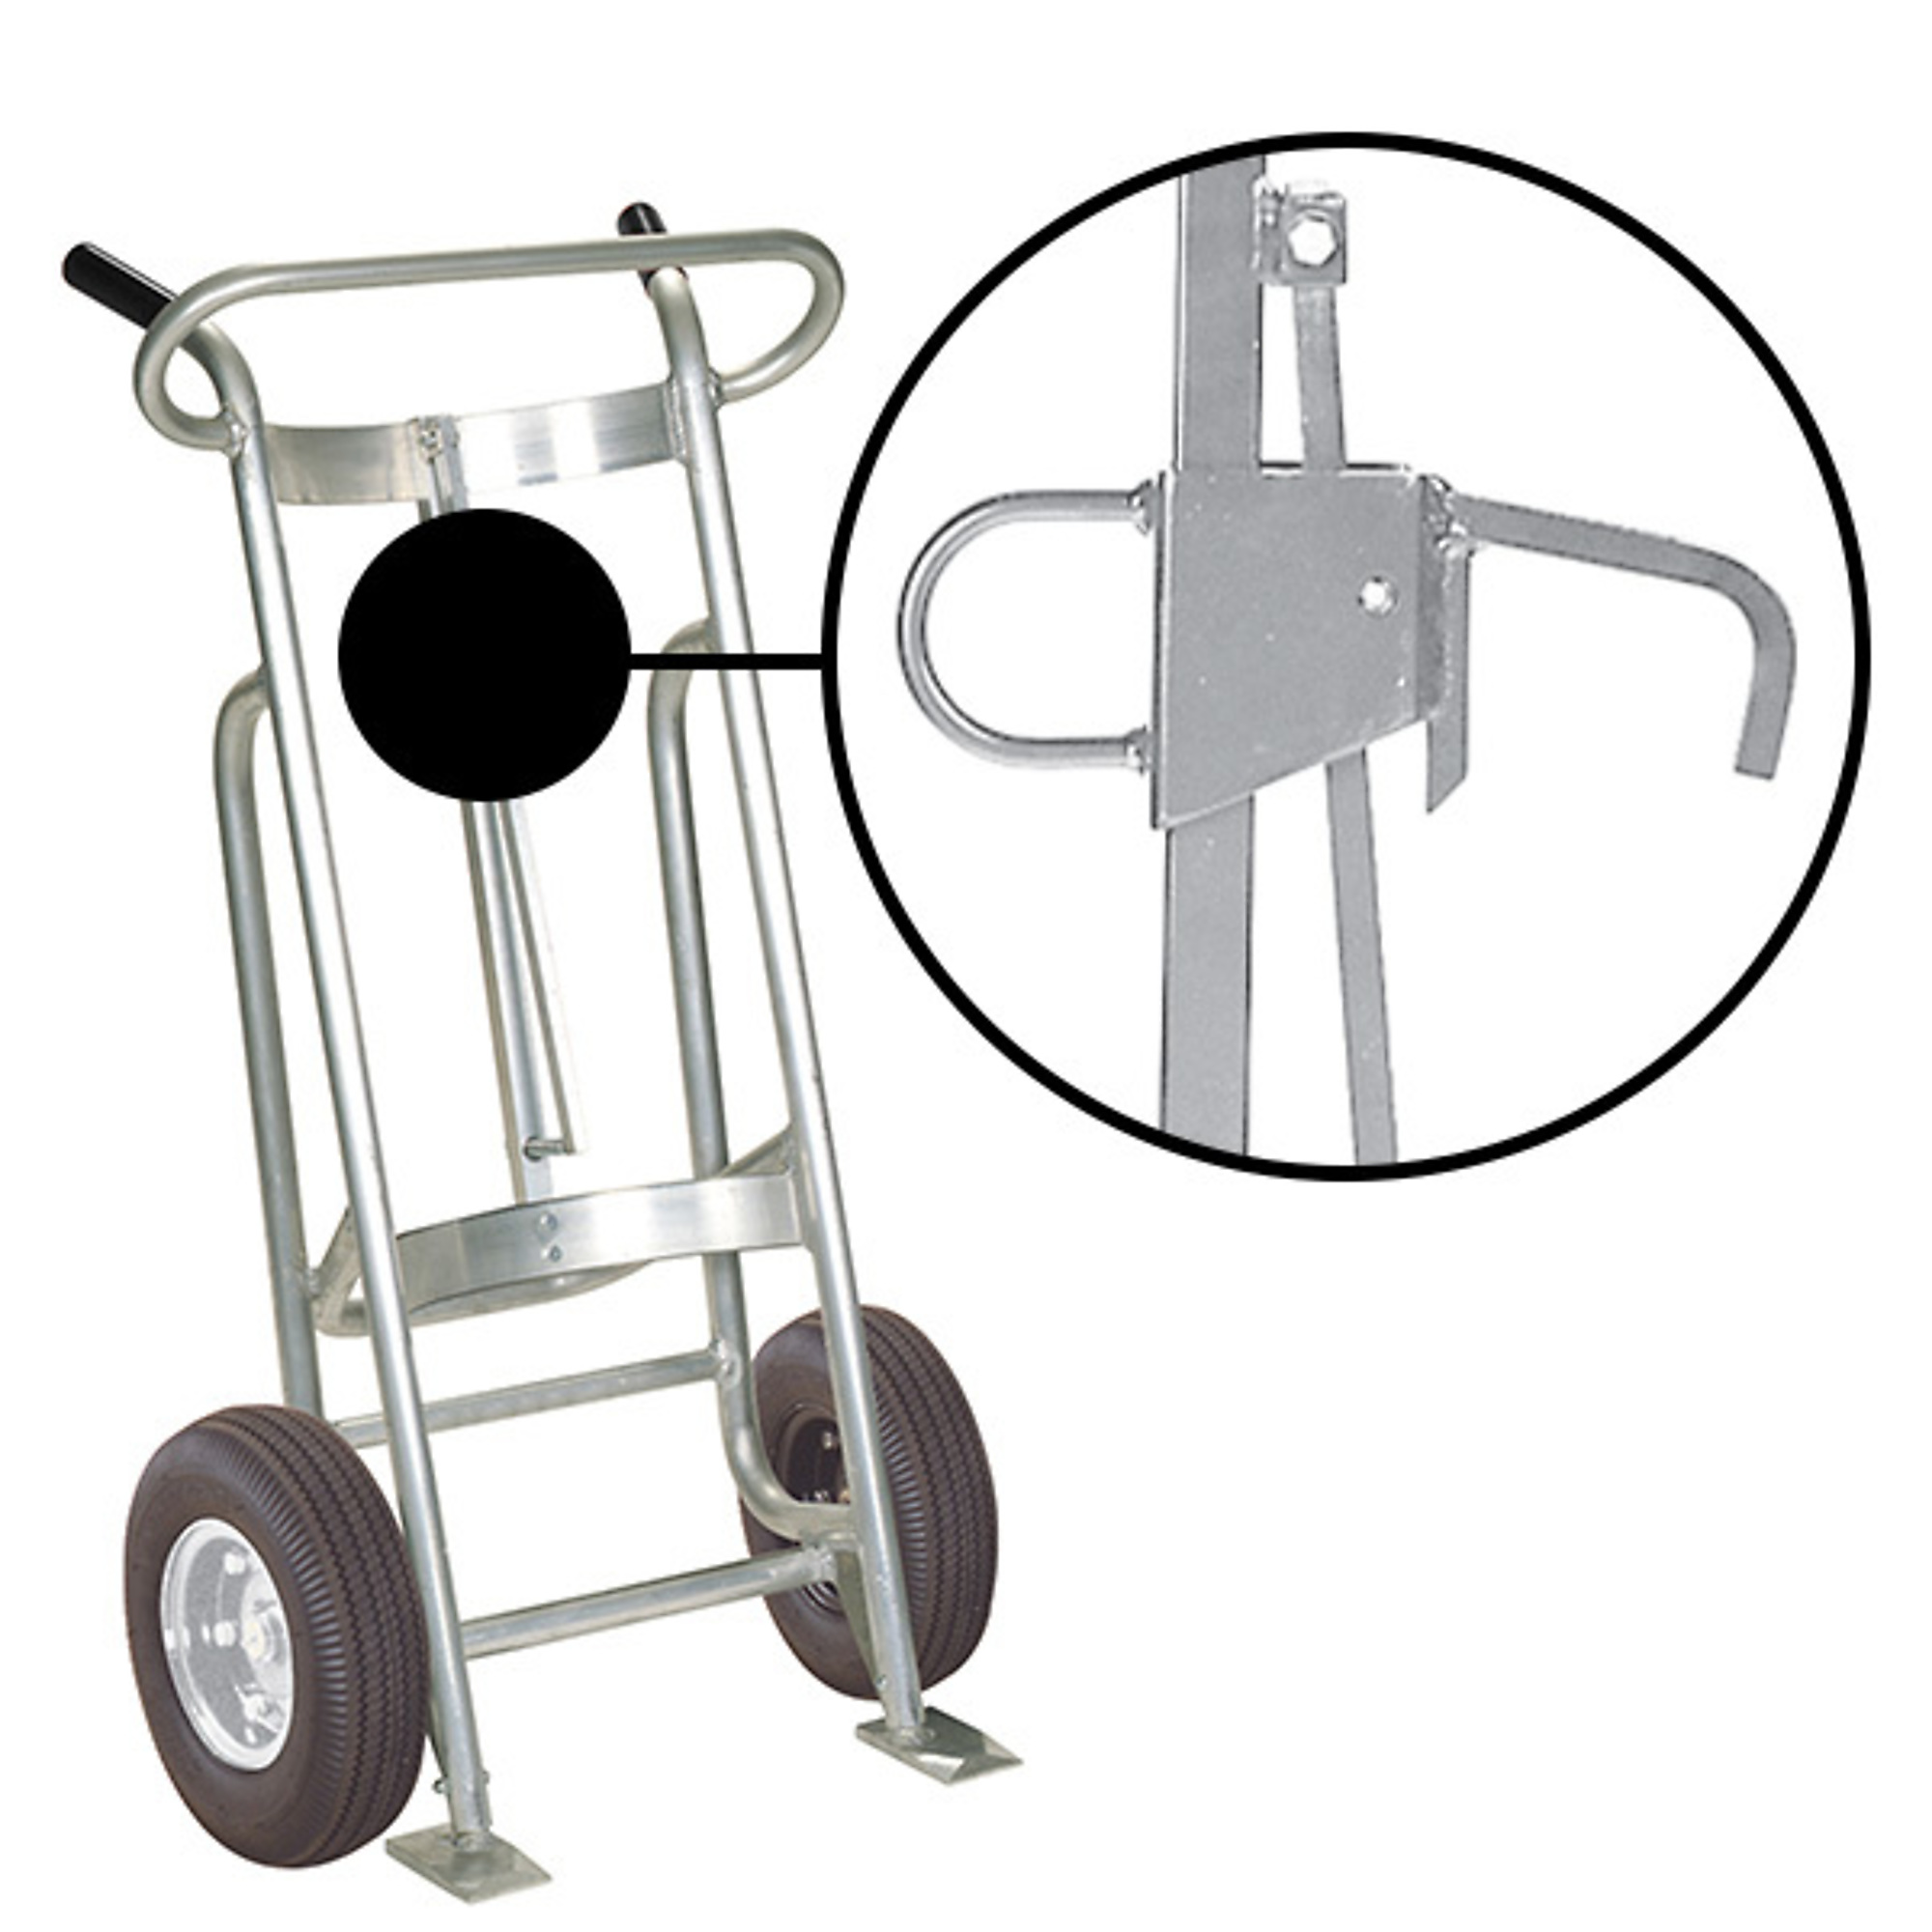 Valley Craft, 2-Wheel Drum Hand Truck, Load Capacity 1000 lb, Height 52 in, Material Aluminum, Model F81500A0L